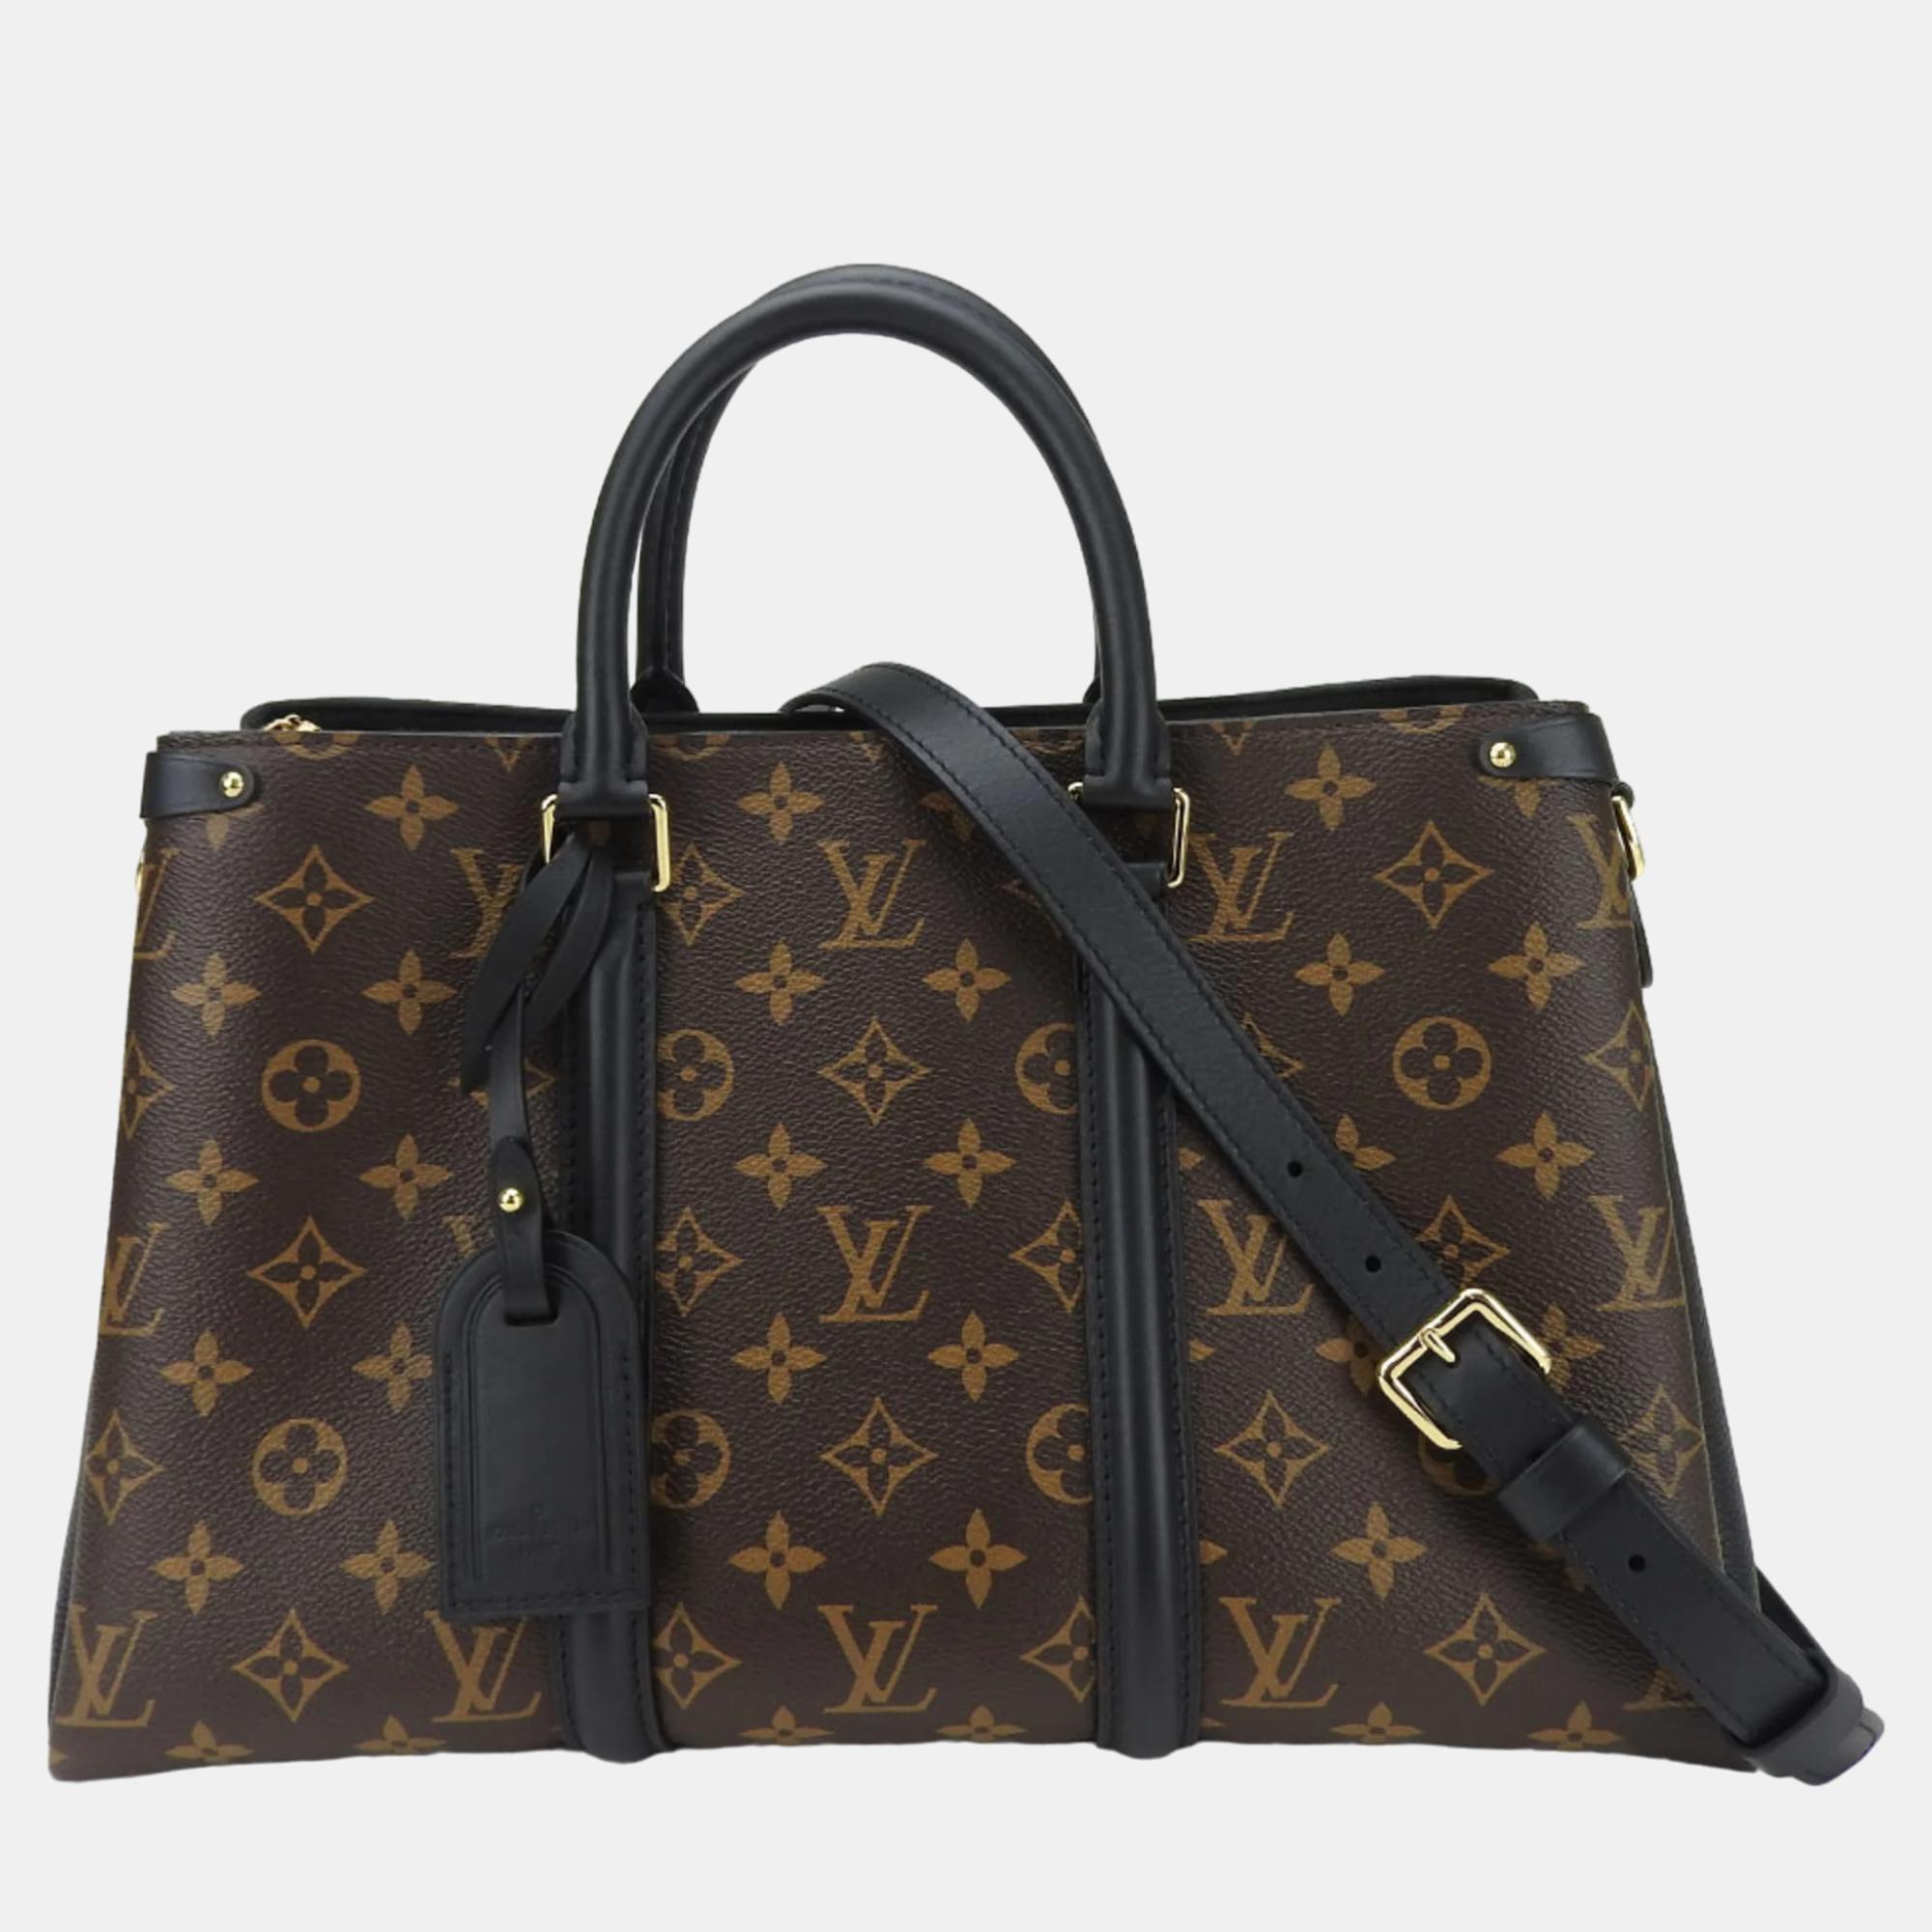 Louis vuitton brown monogram canvas with leather mm soufflot tote bag